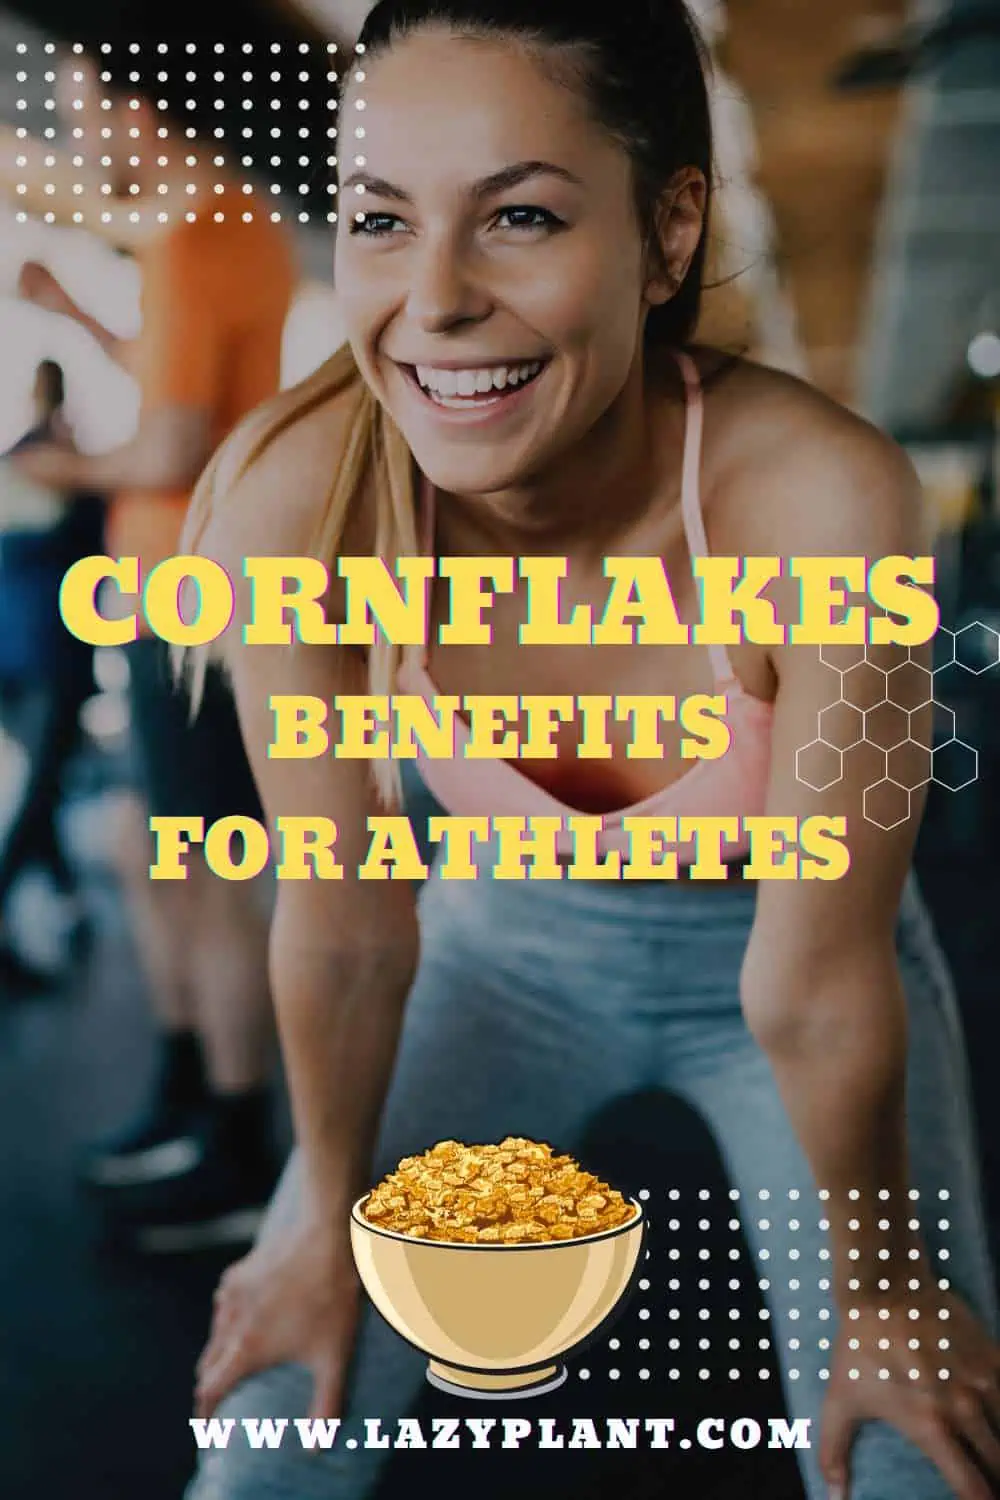 Eating 1–2 servings of cornflakes may enhance athletic performance.